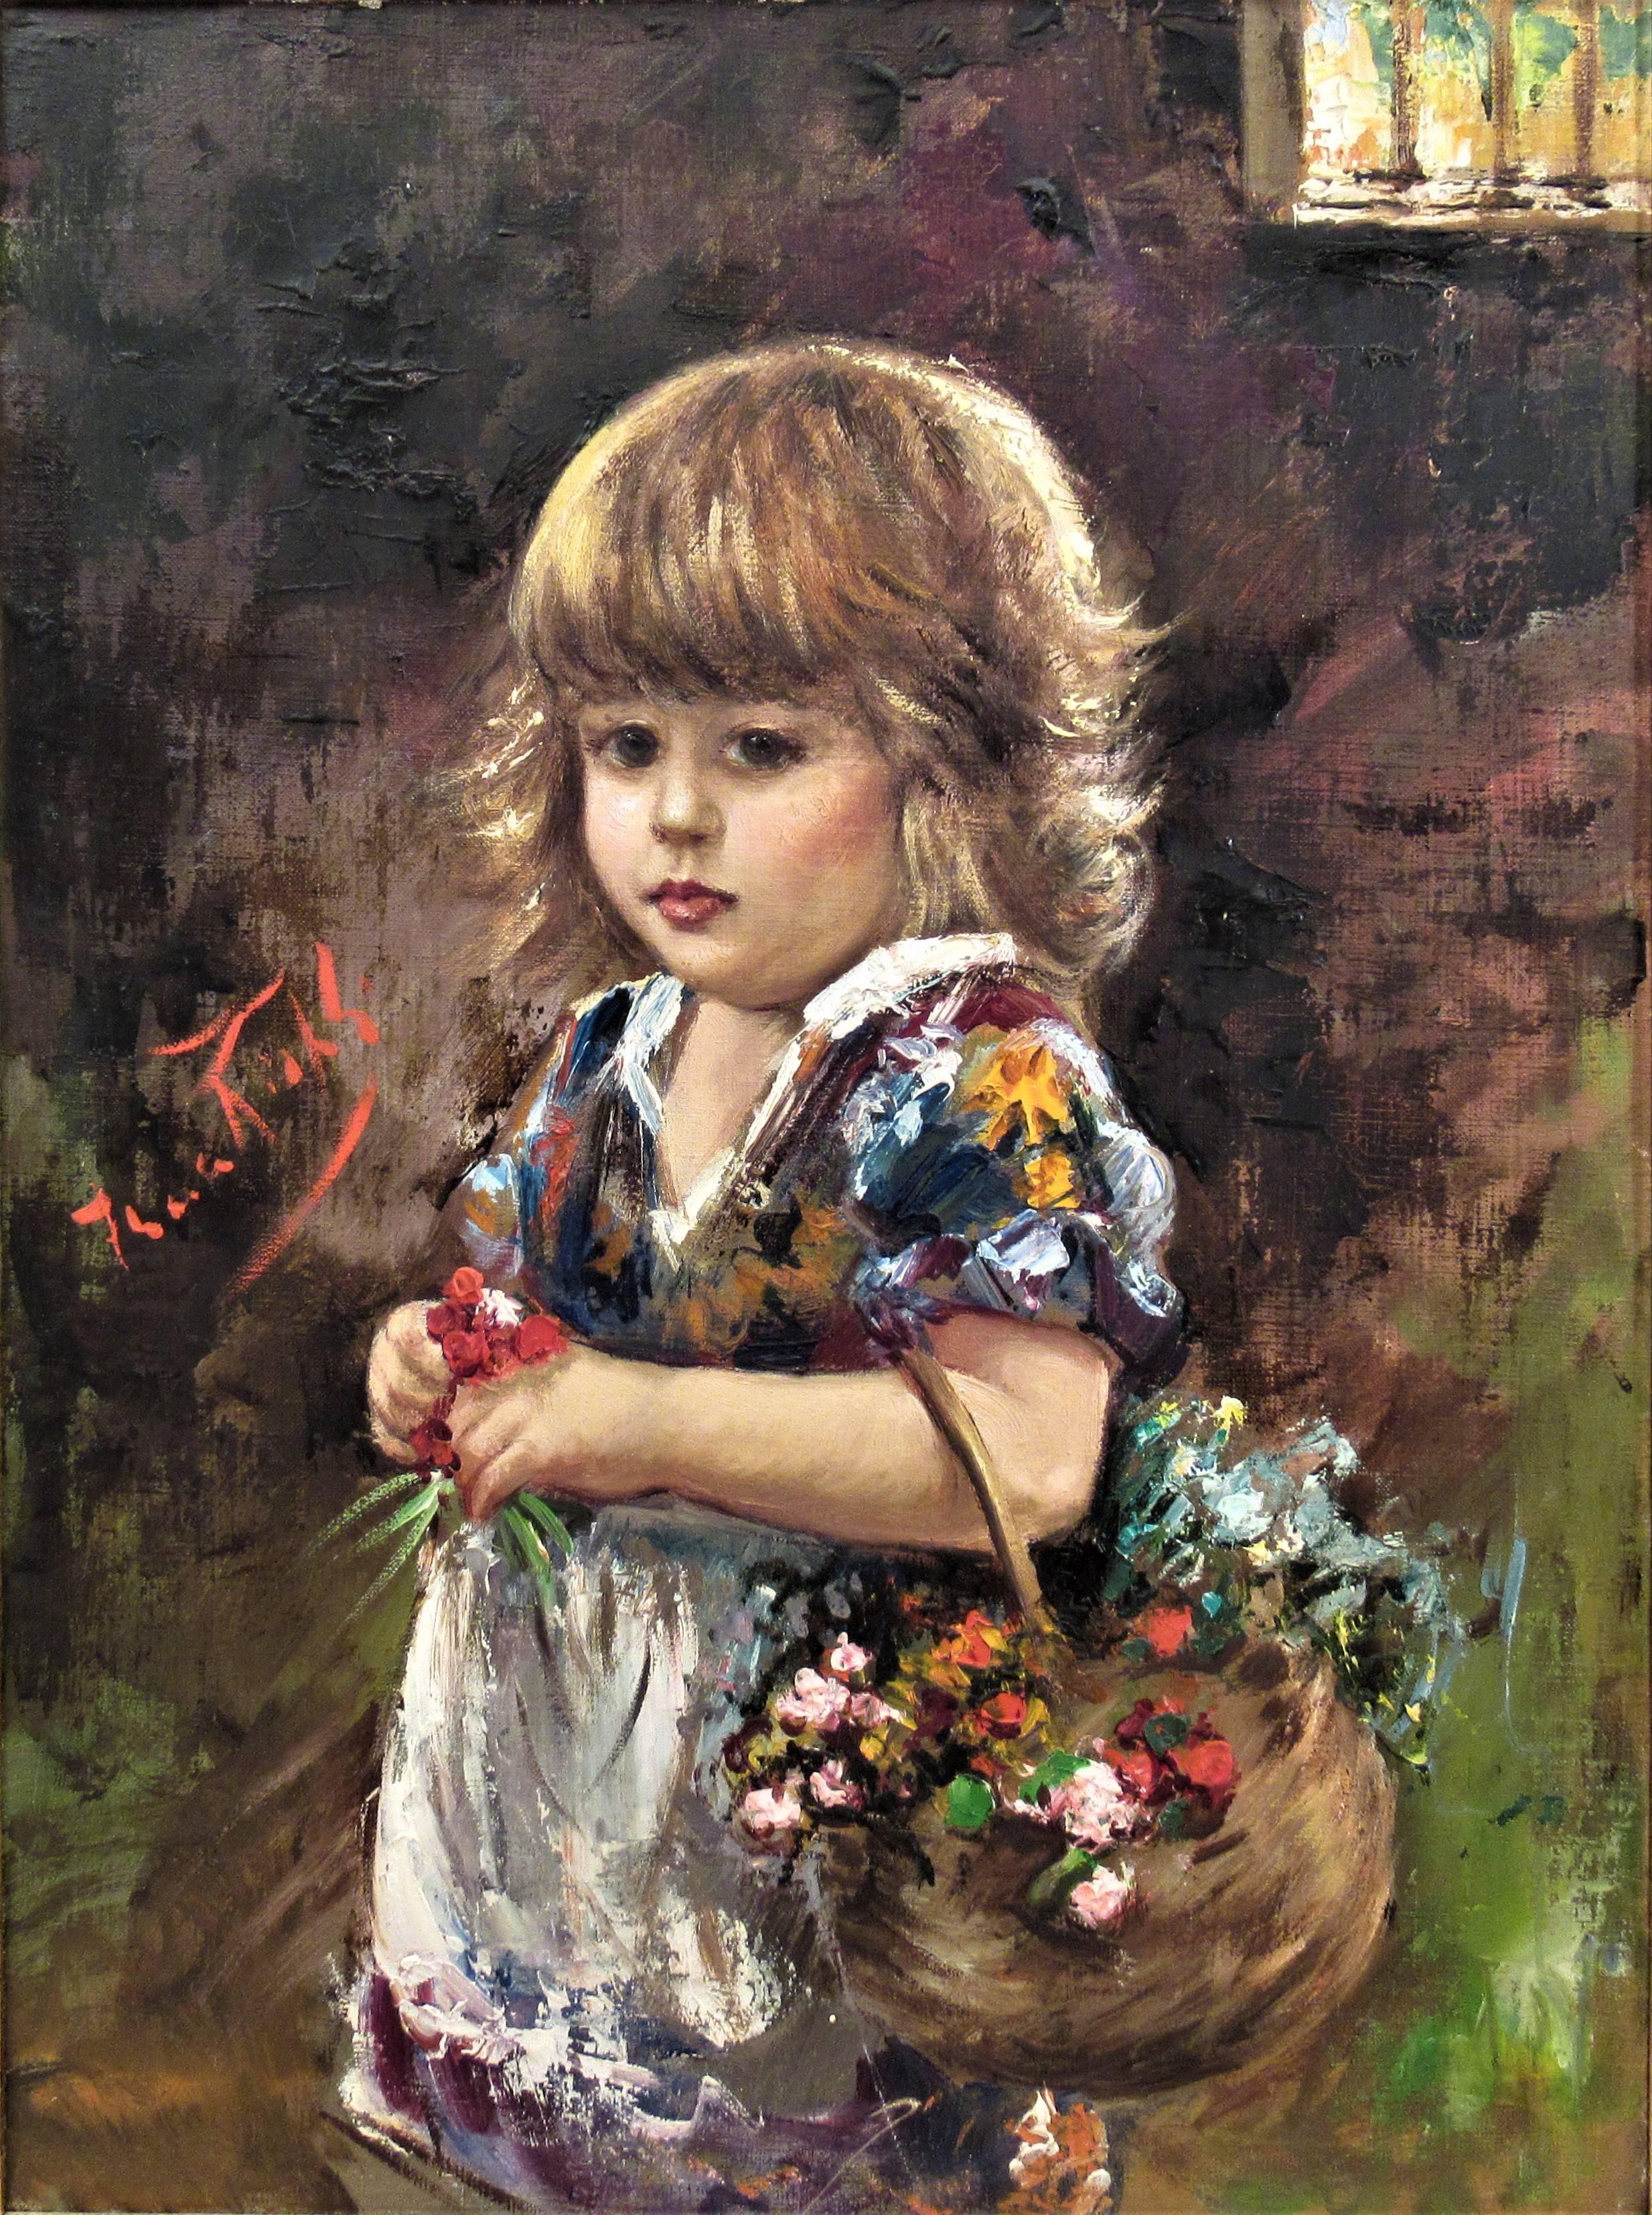 Little Girl with Flowers Basket - Painting by Franco Rispoli